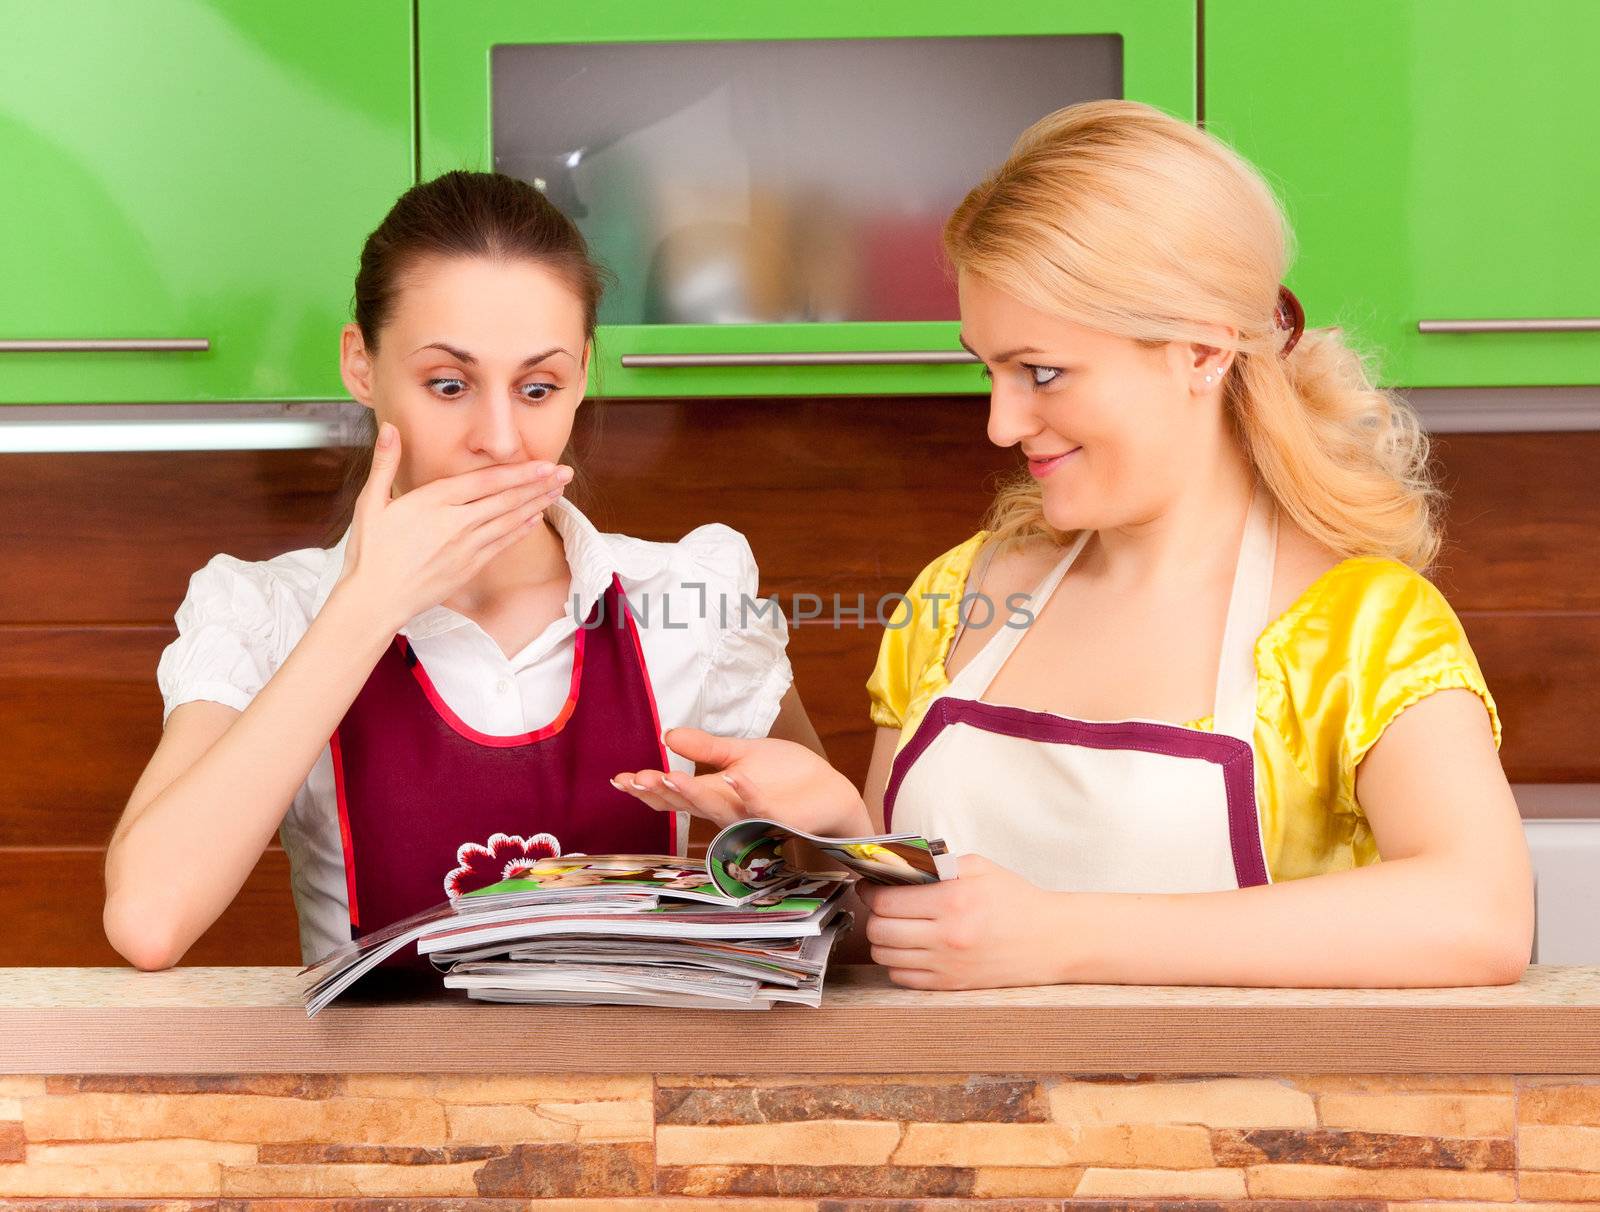 Two young women discuss fashion magazines in the kitchen